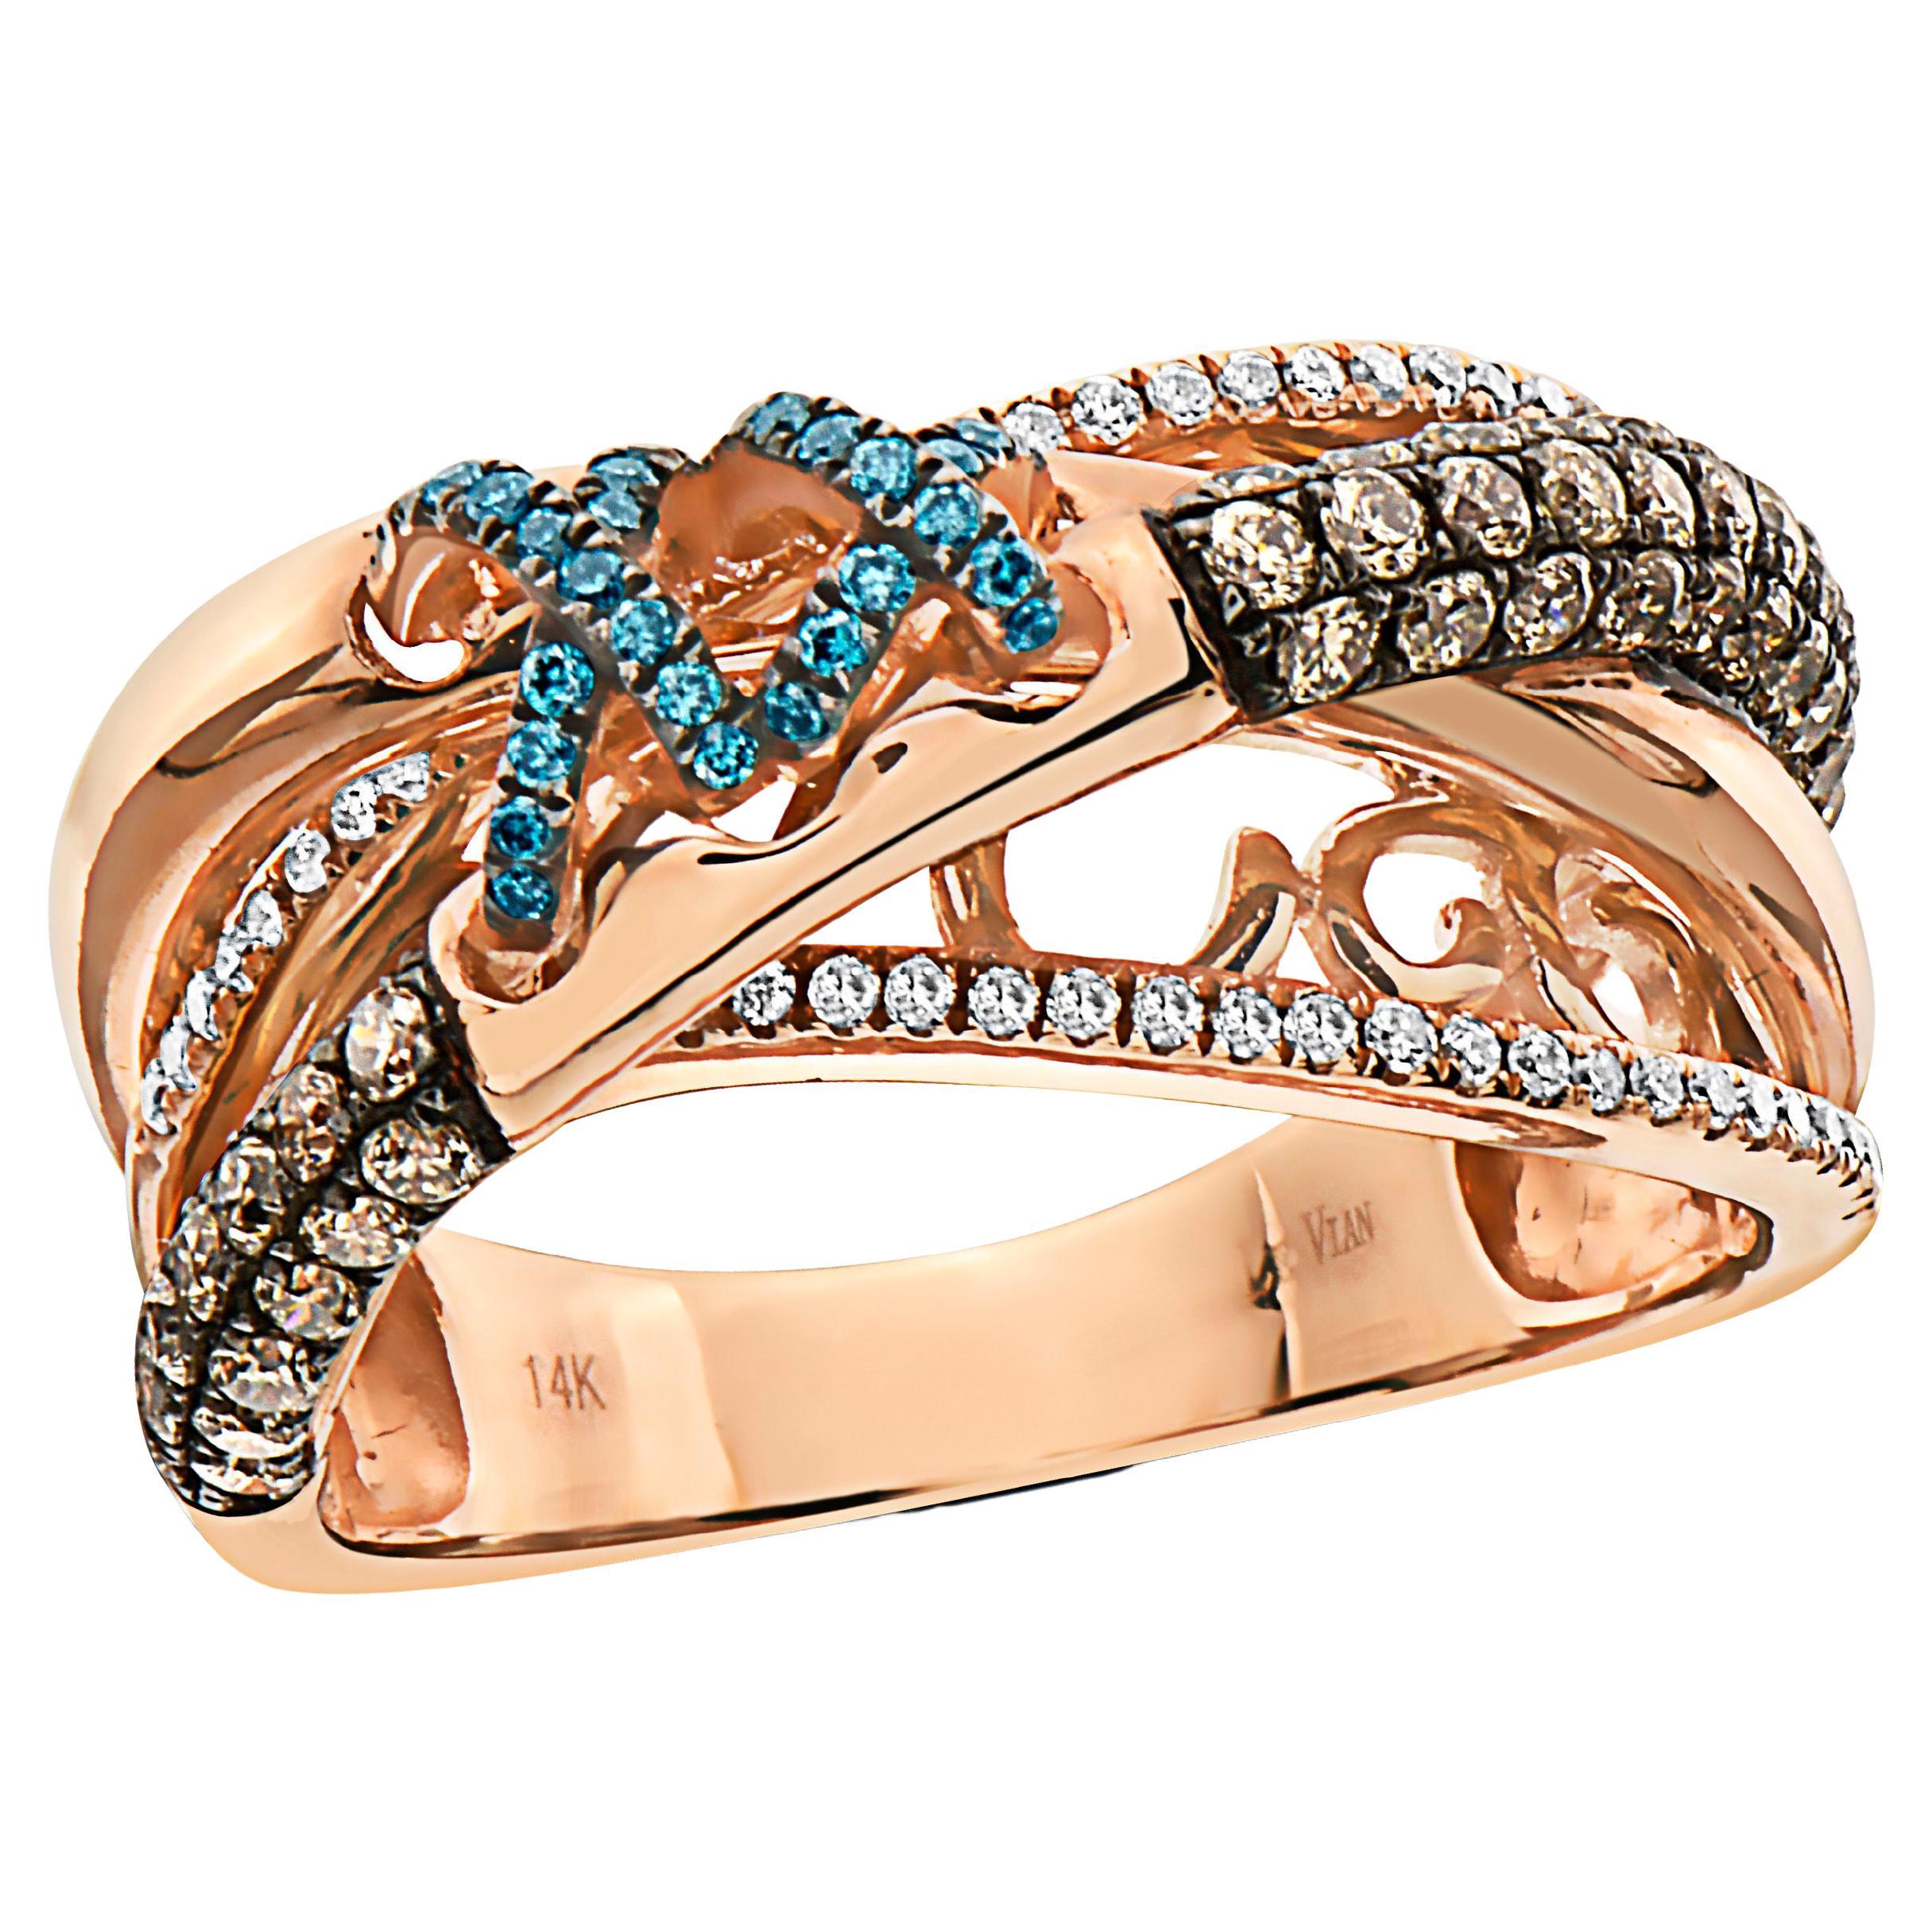 Le Vian Ring Chocolate, Blue, and White Diamonds, Set in 14K Rose Gold For Sale